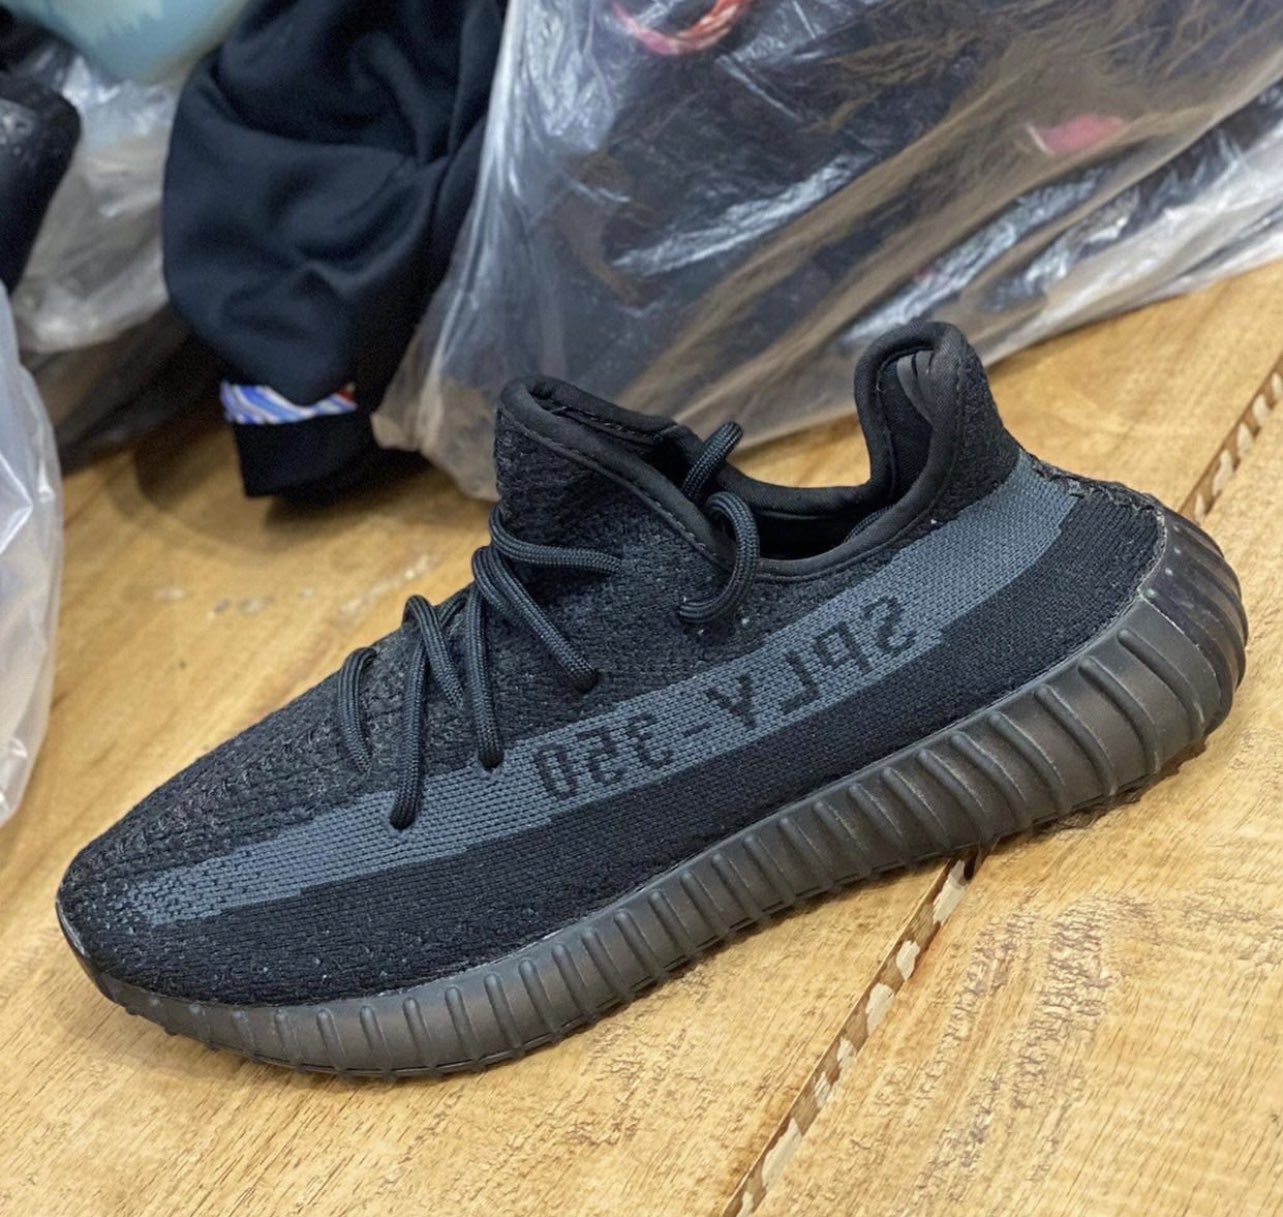 First Look At The Adidas Yeezy Boost 350 V2 